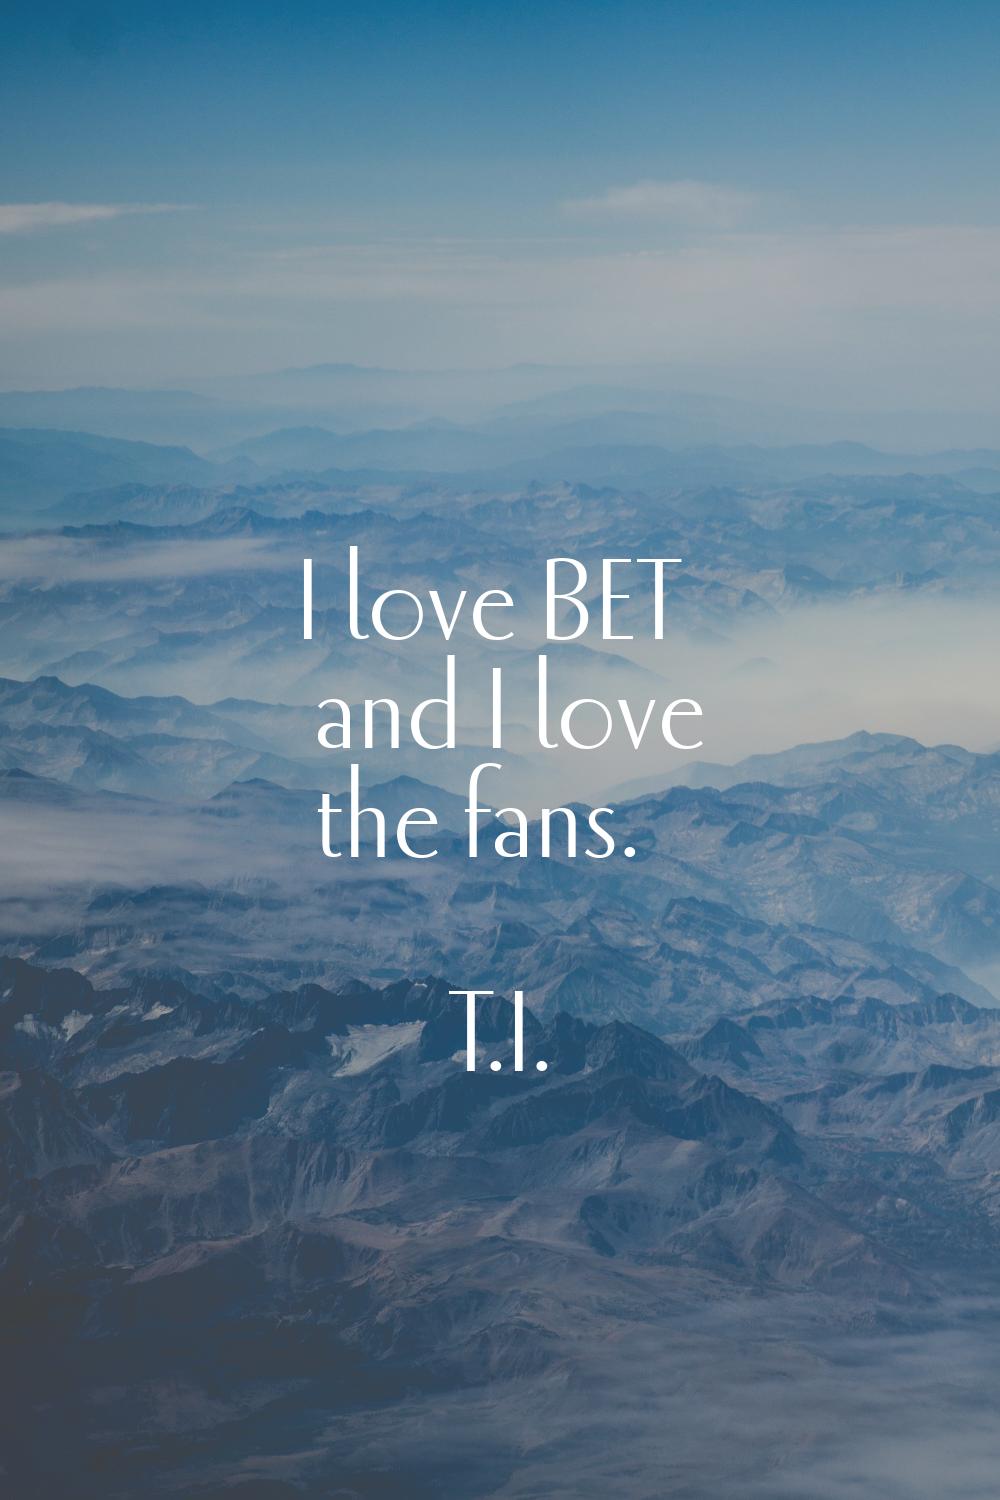 I love BET and I love the fans.